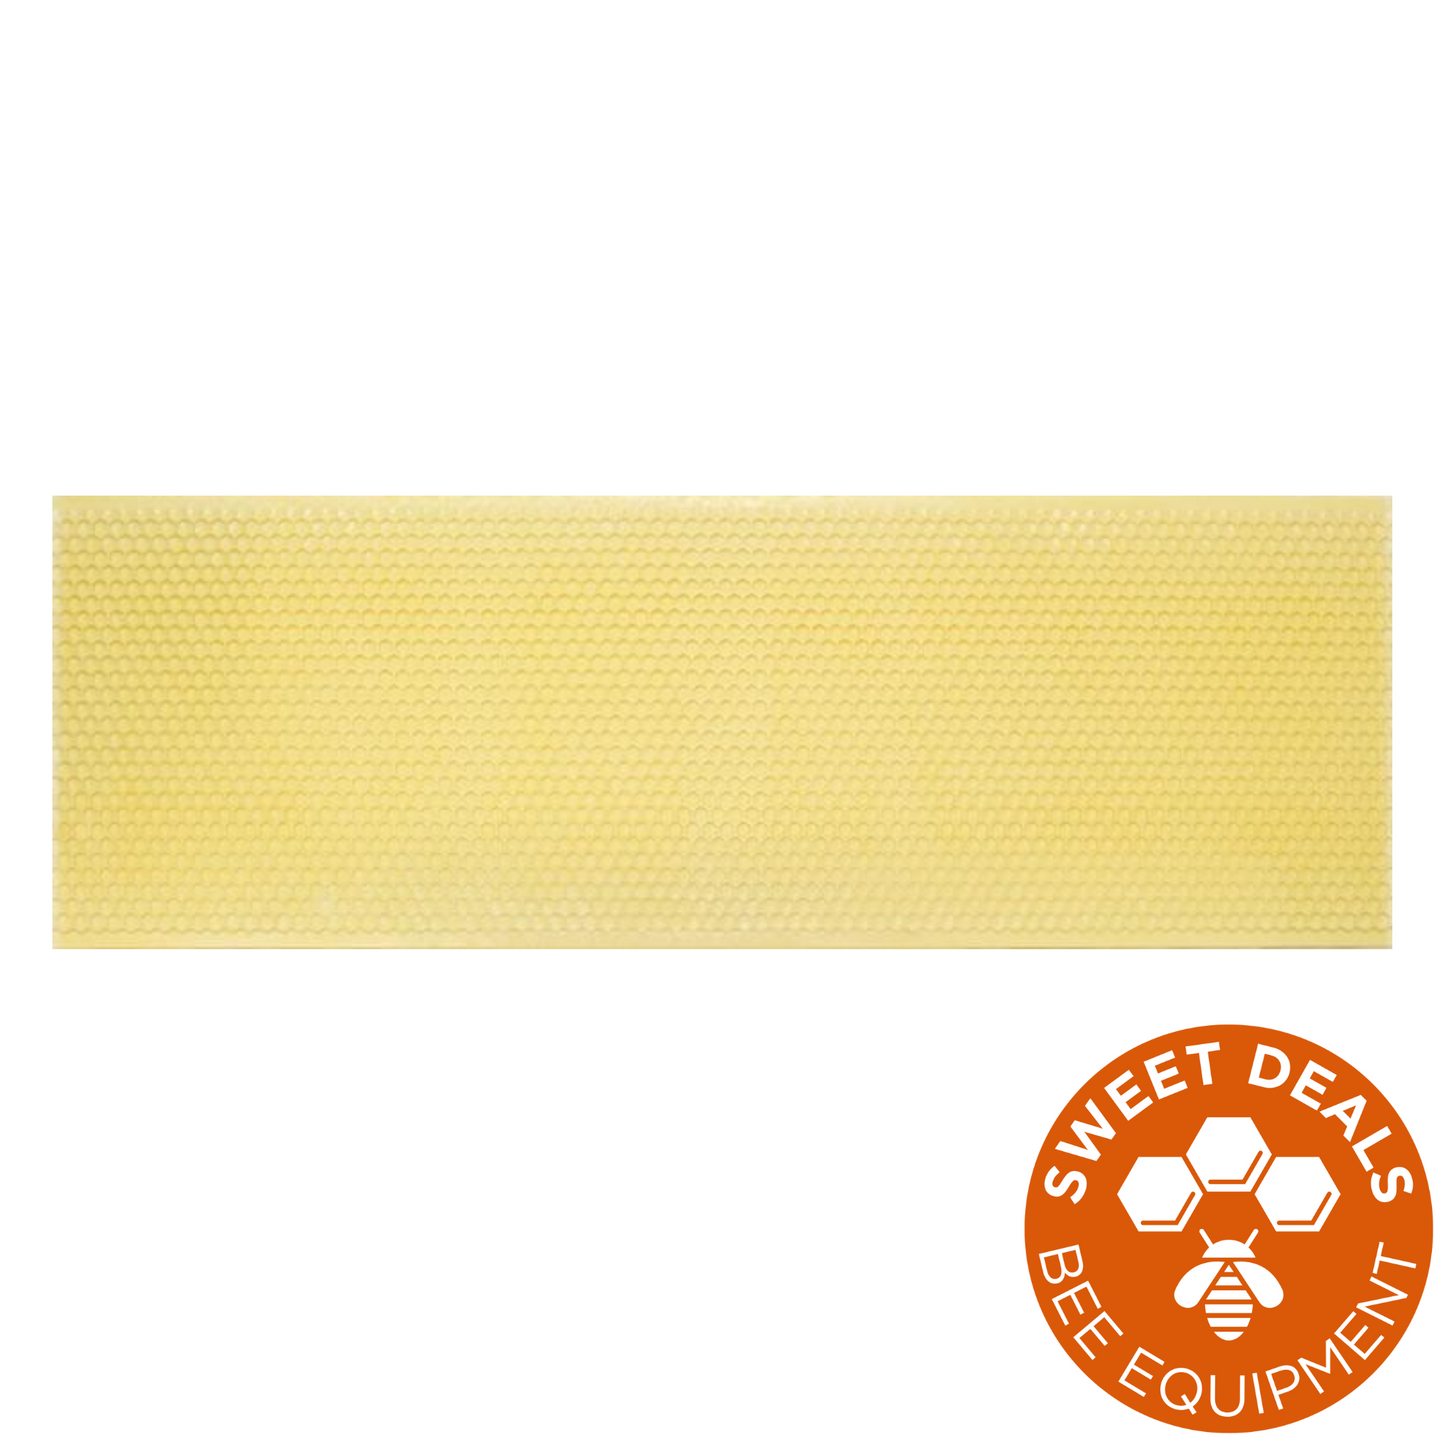 National Super Foundation, Beeswax Coated Plastic